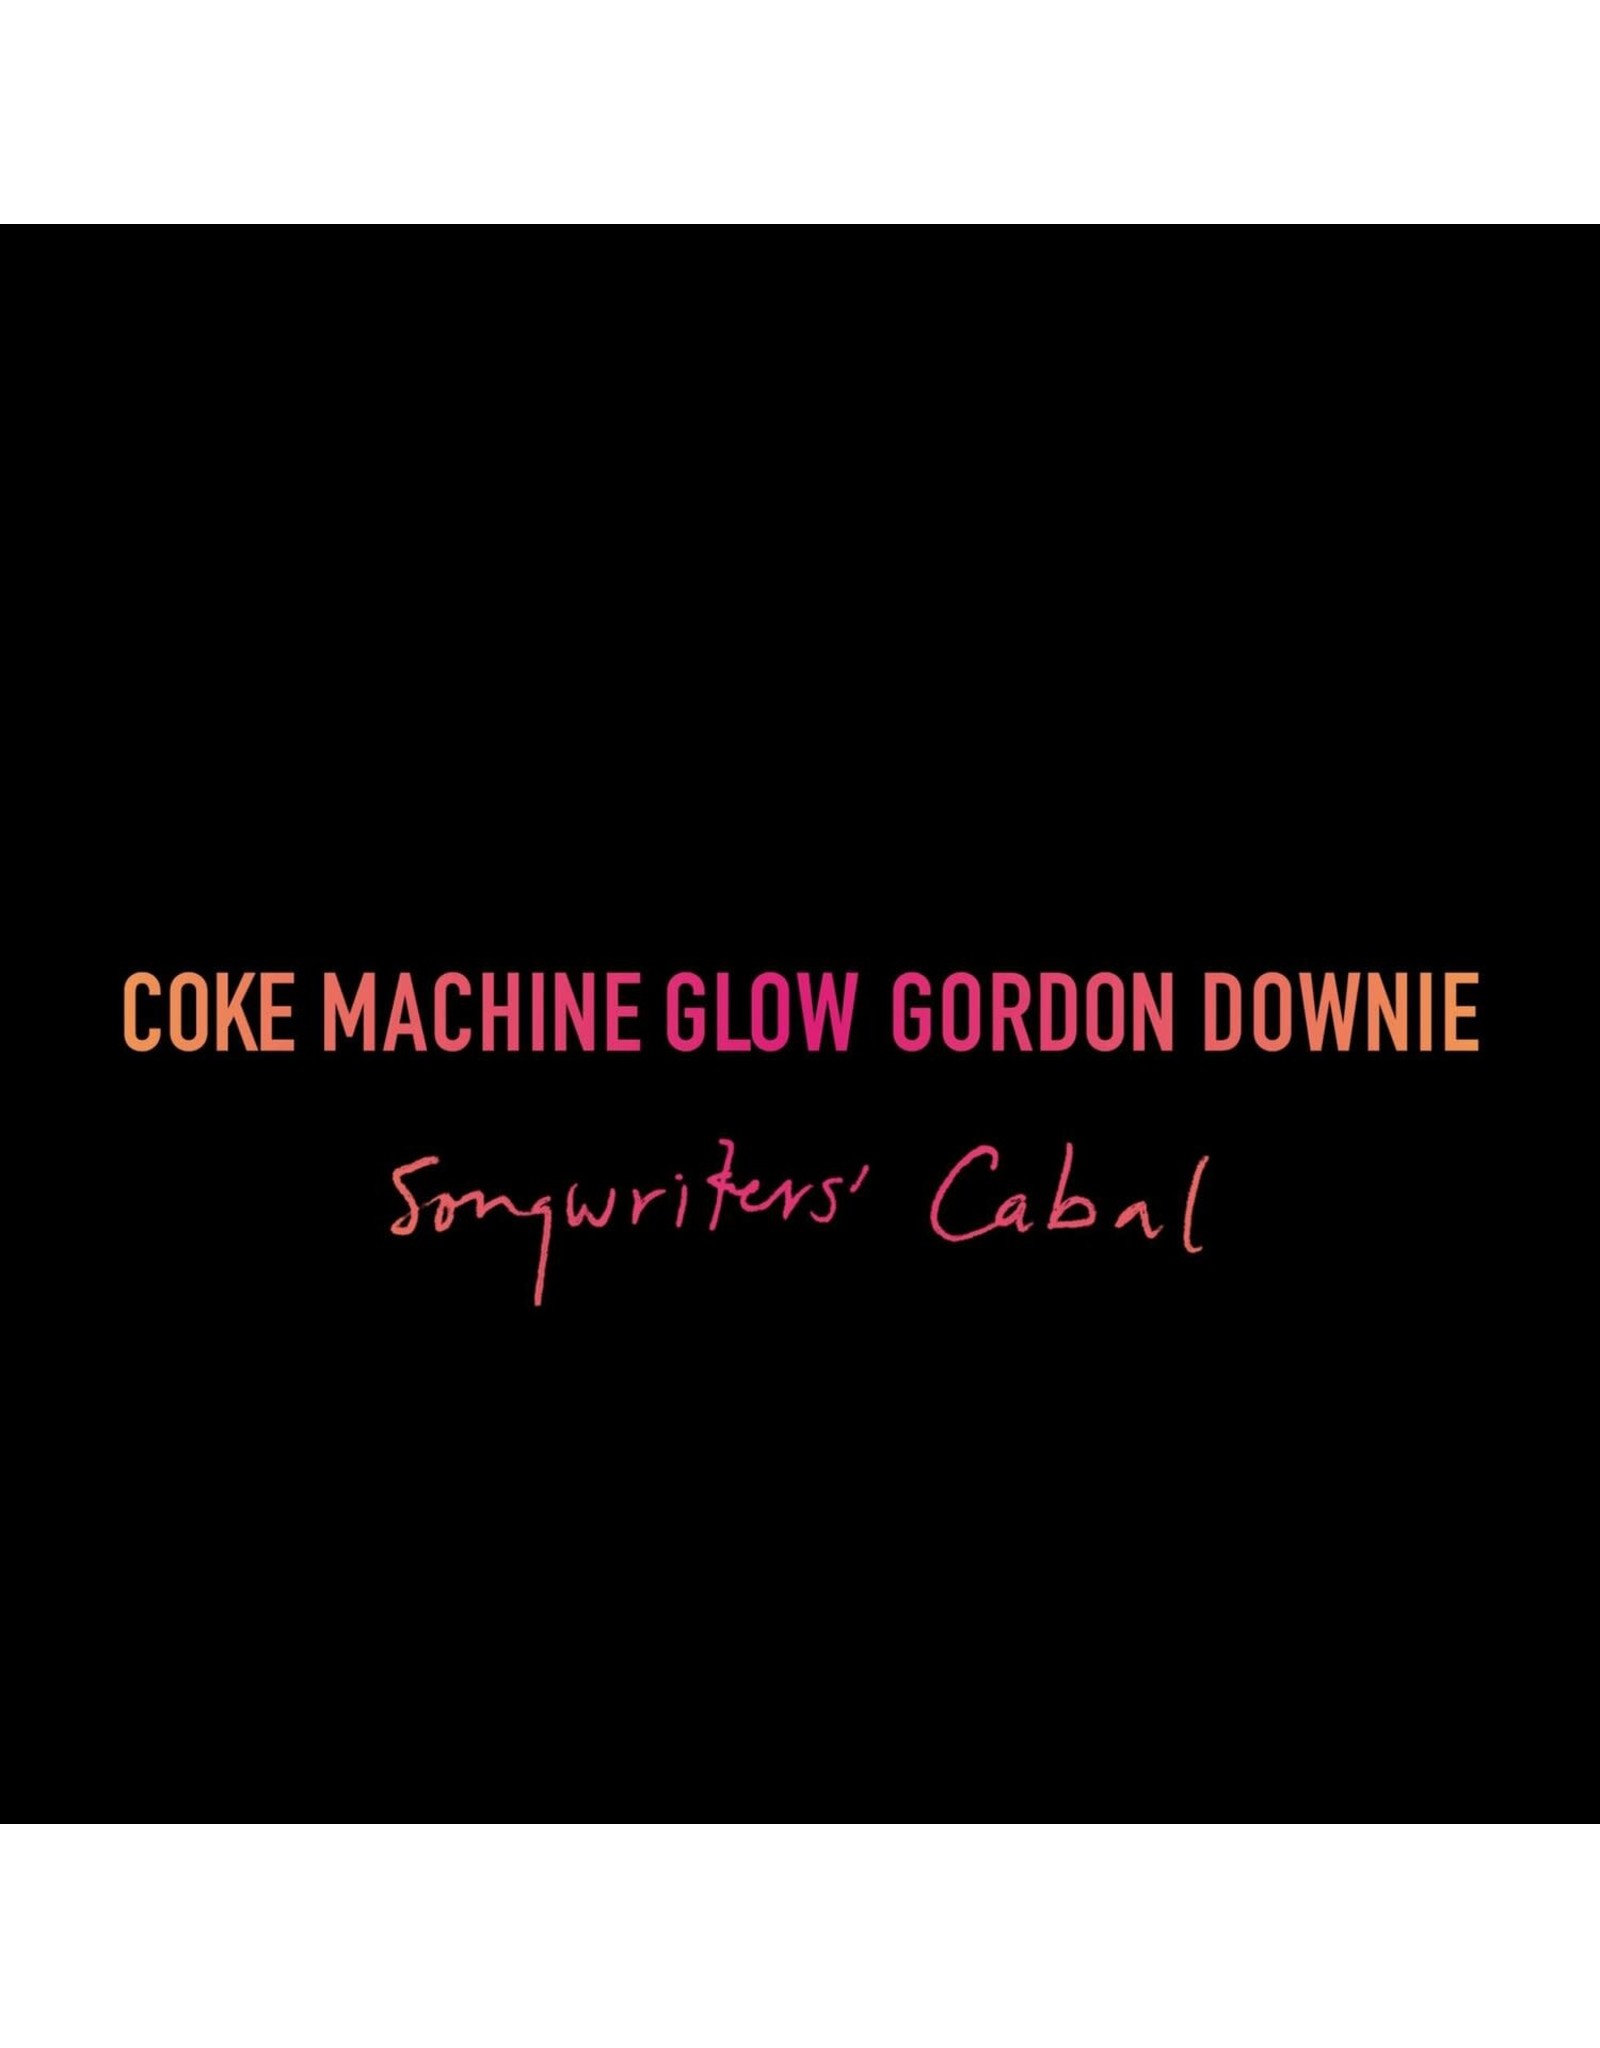 Gord Downie - Coke Machine Glow (20th Anniversary Expanded Edition) [3LP]